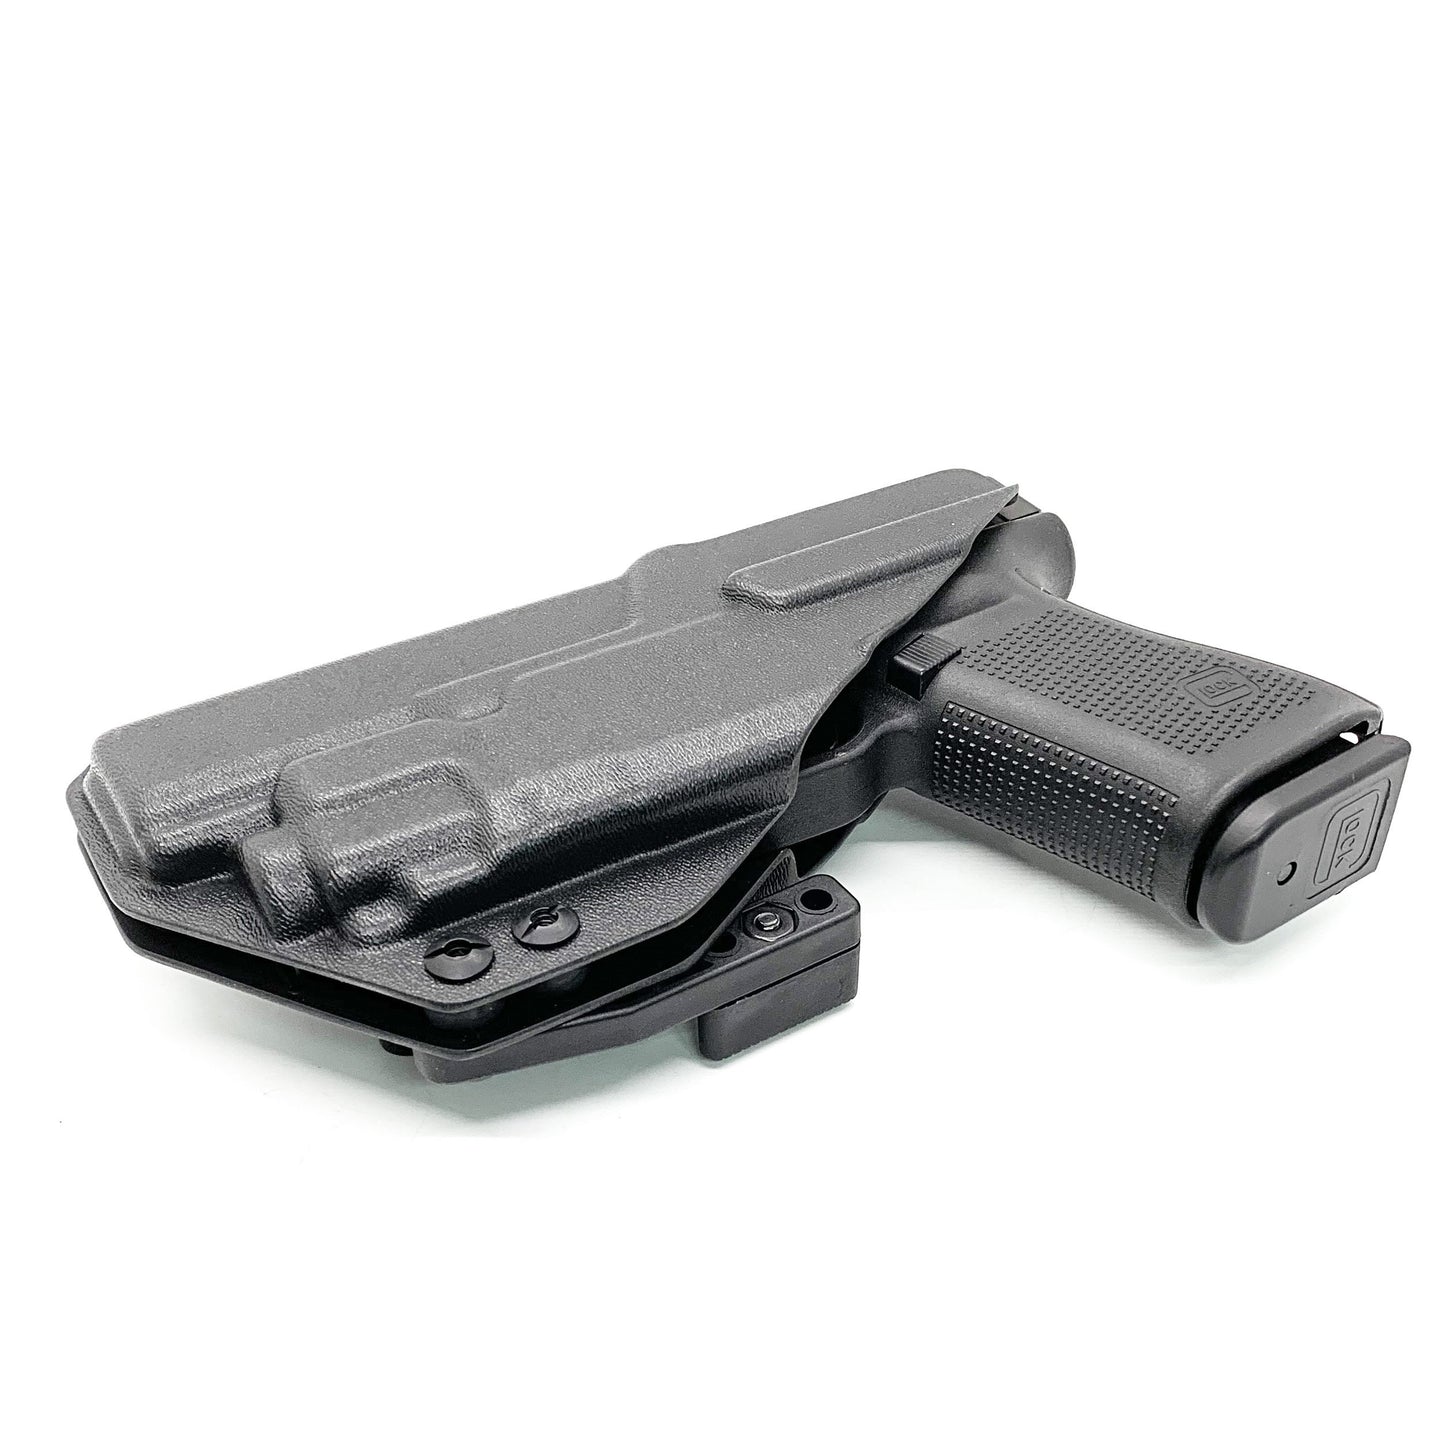 Glock 19/17 with TLR-8A IWB Holster